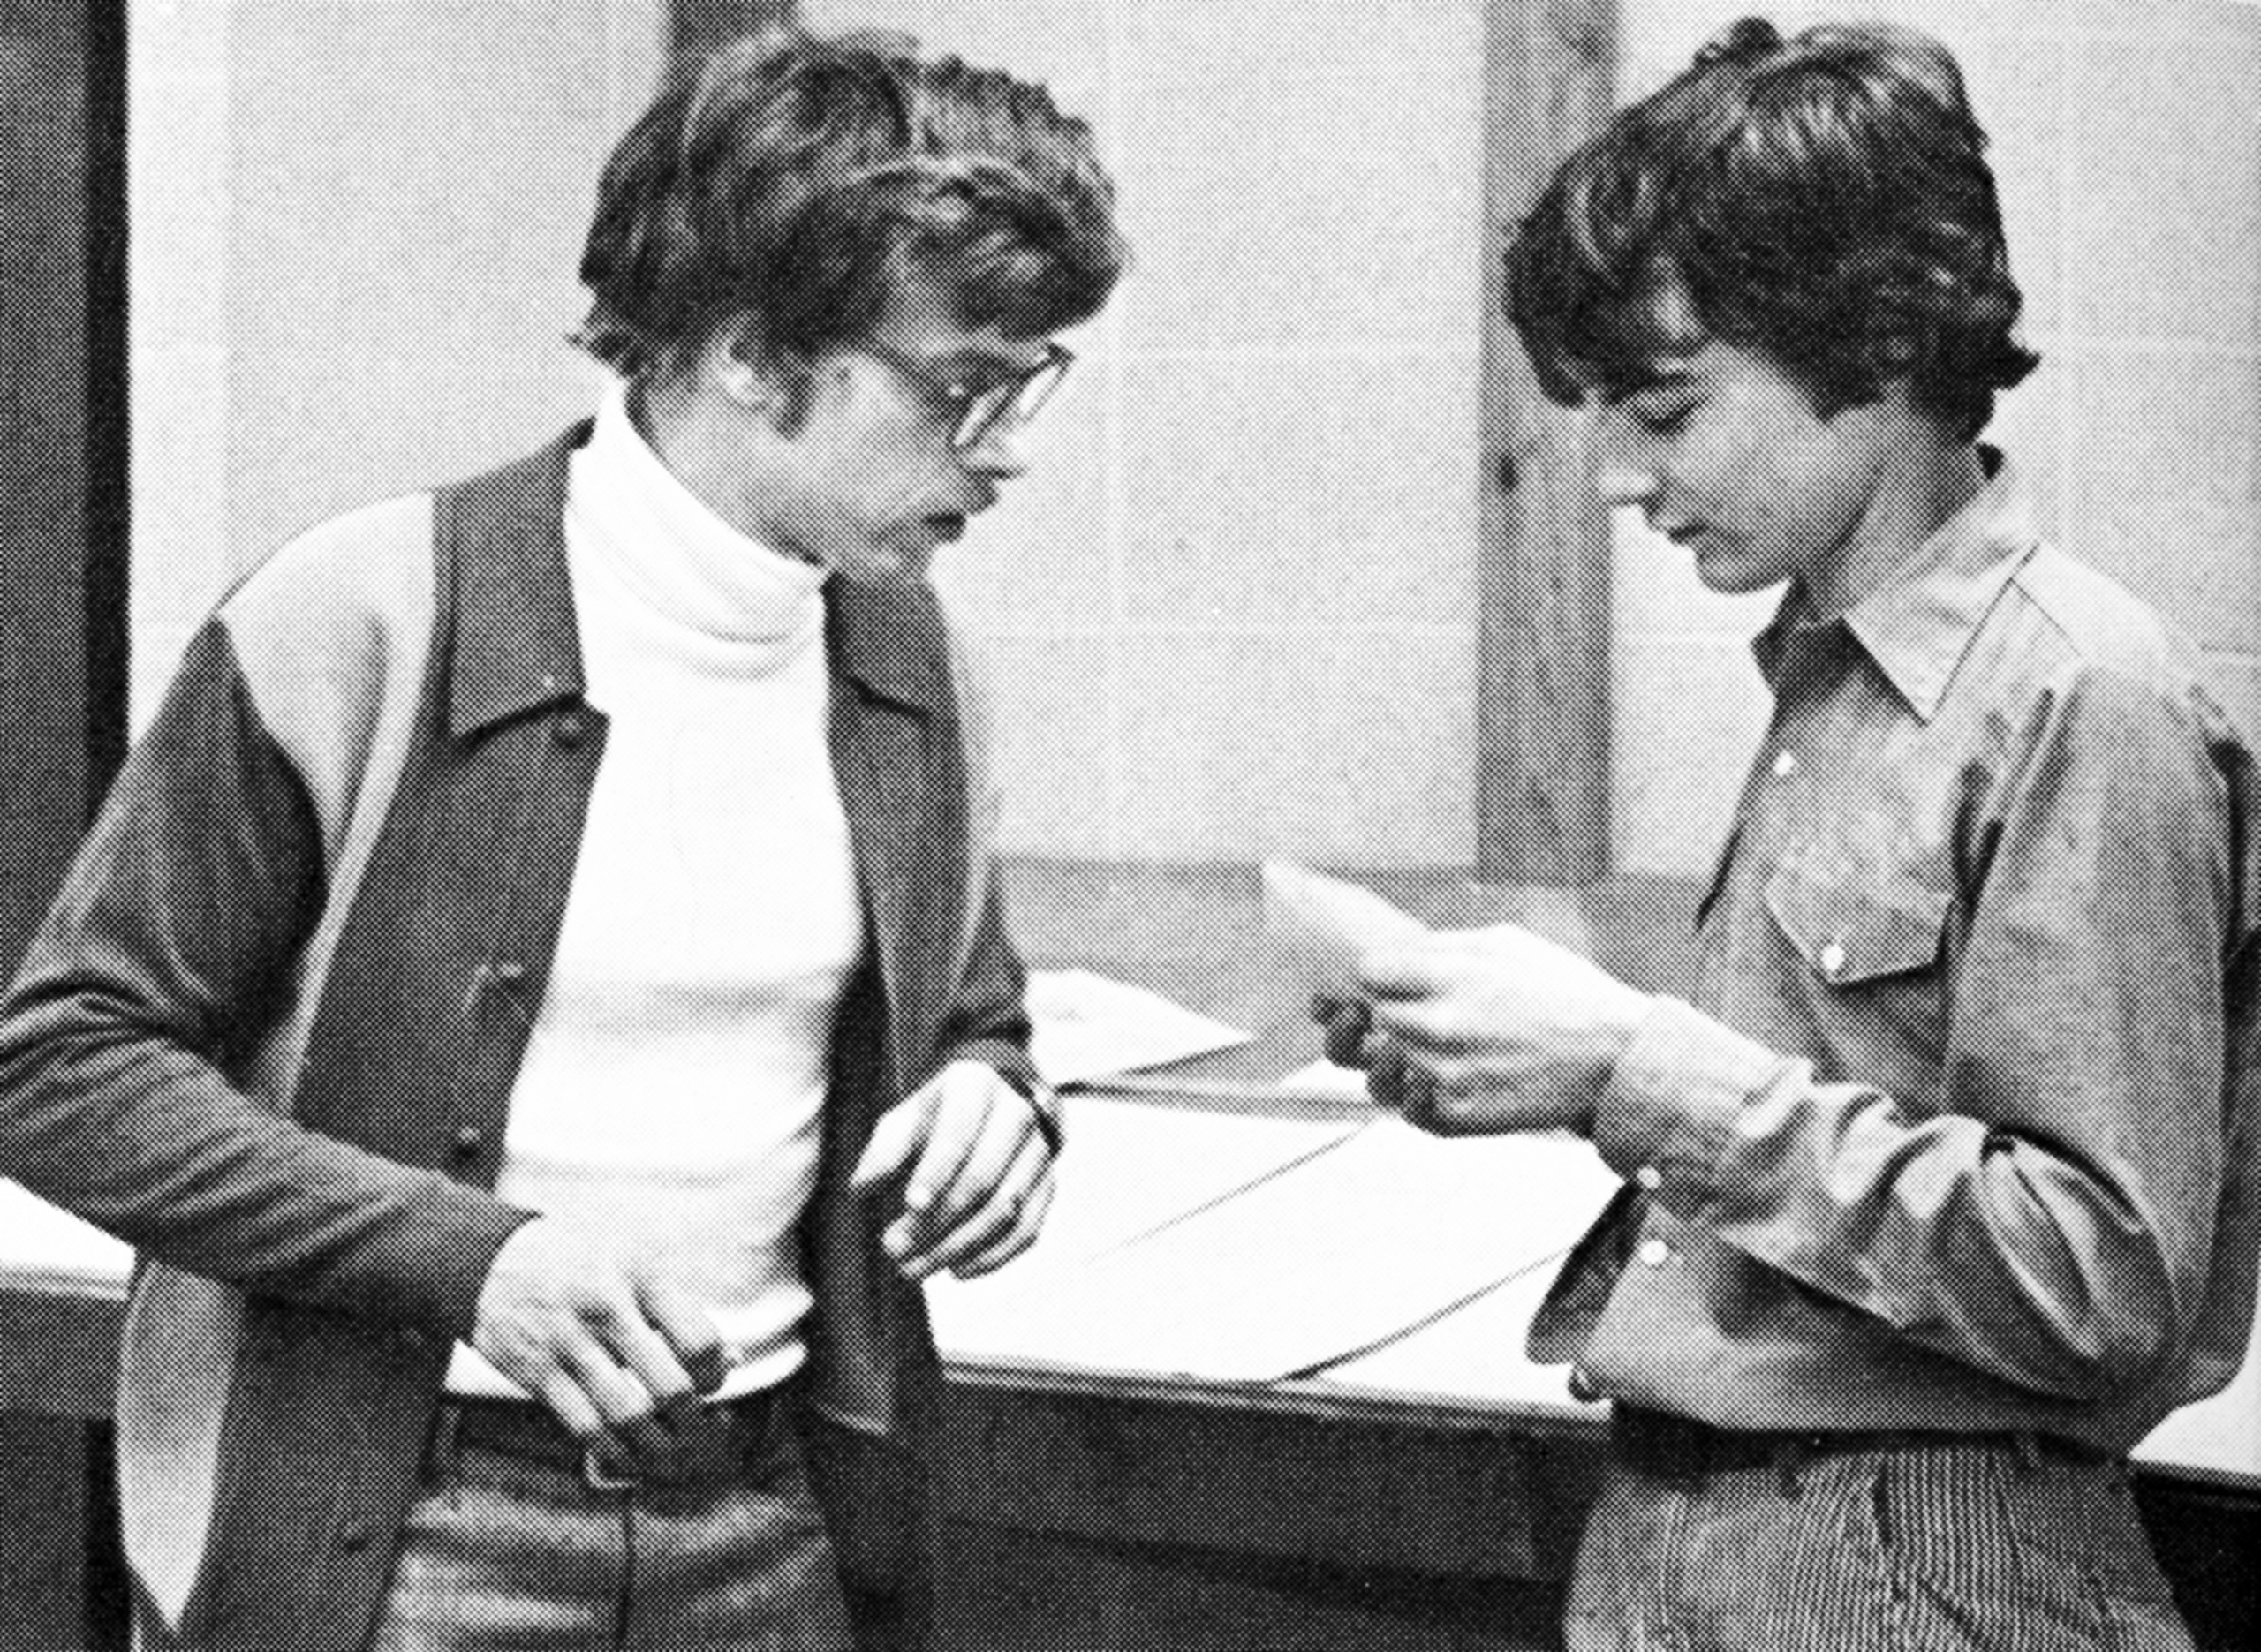 Tim Kaine, right, during his junior year at Rockhurst High School in Kansas, Mo. in 1975.